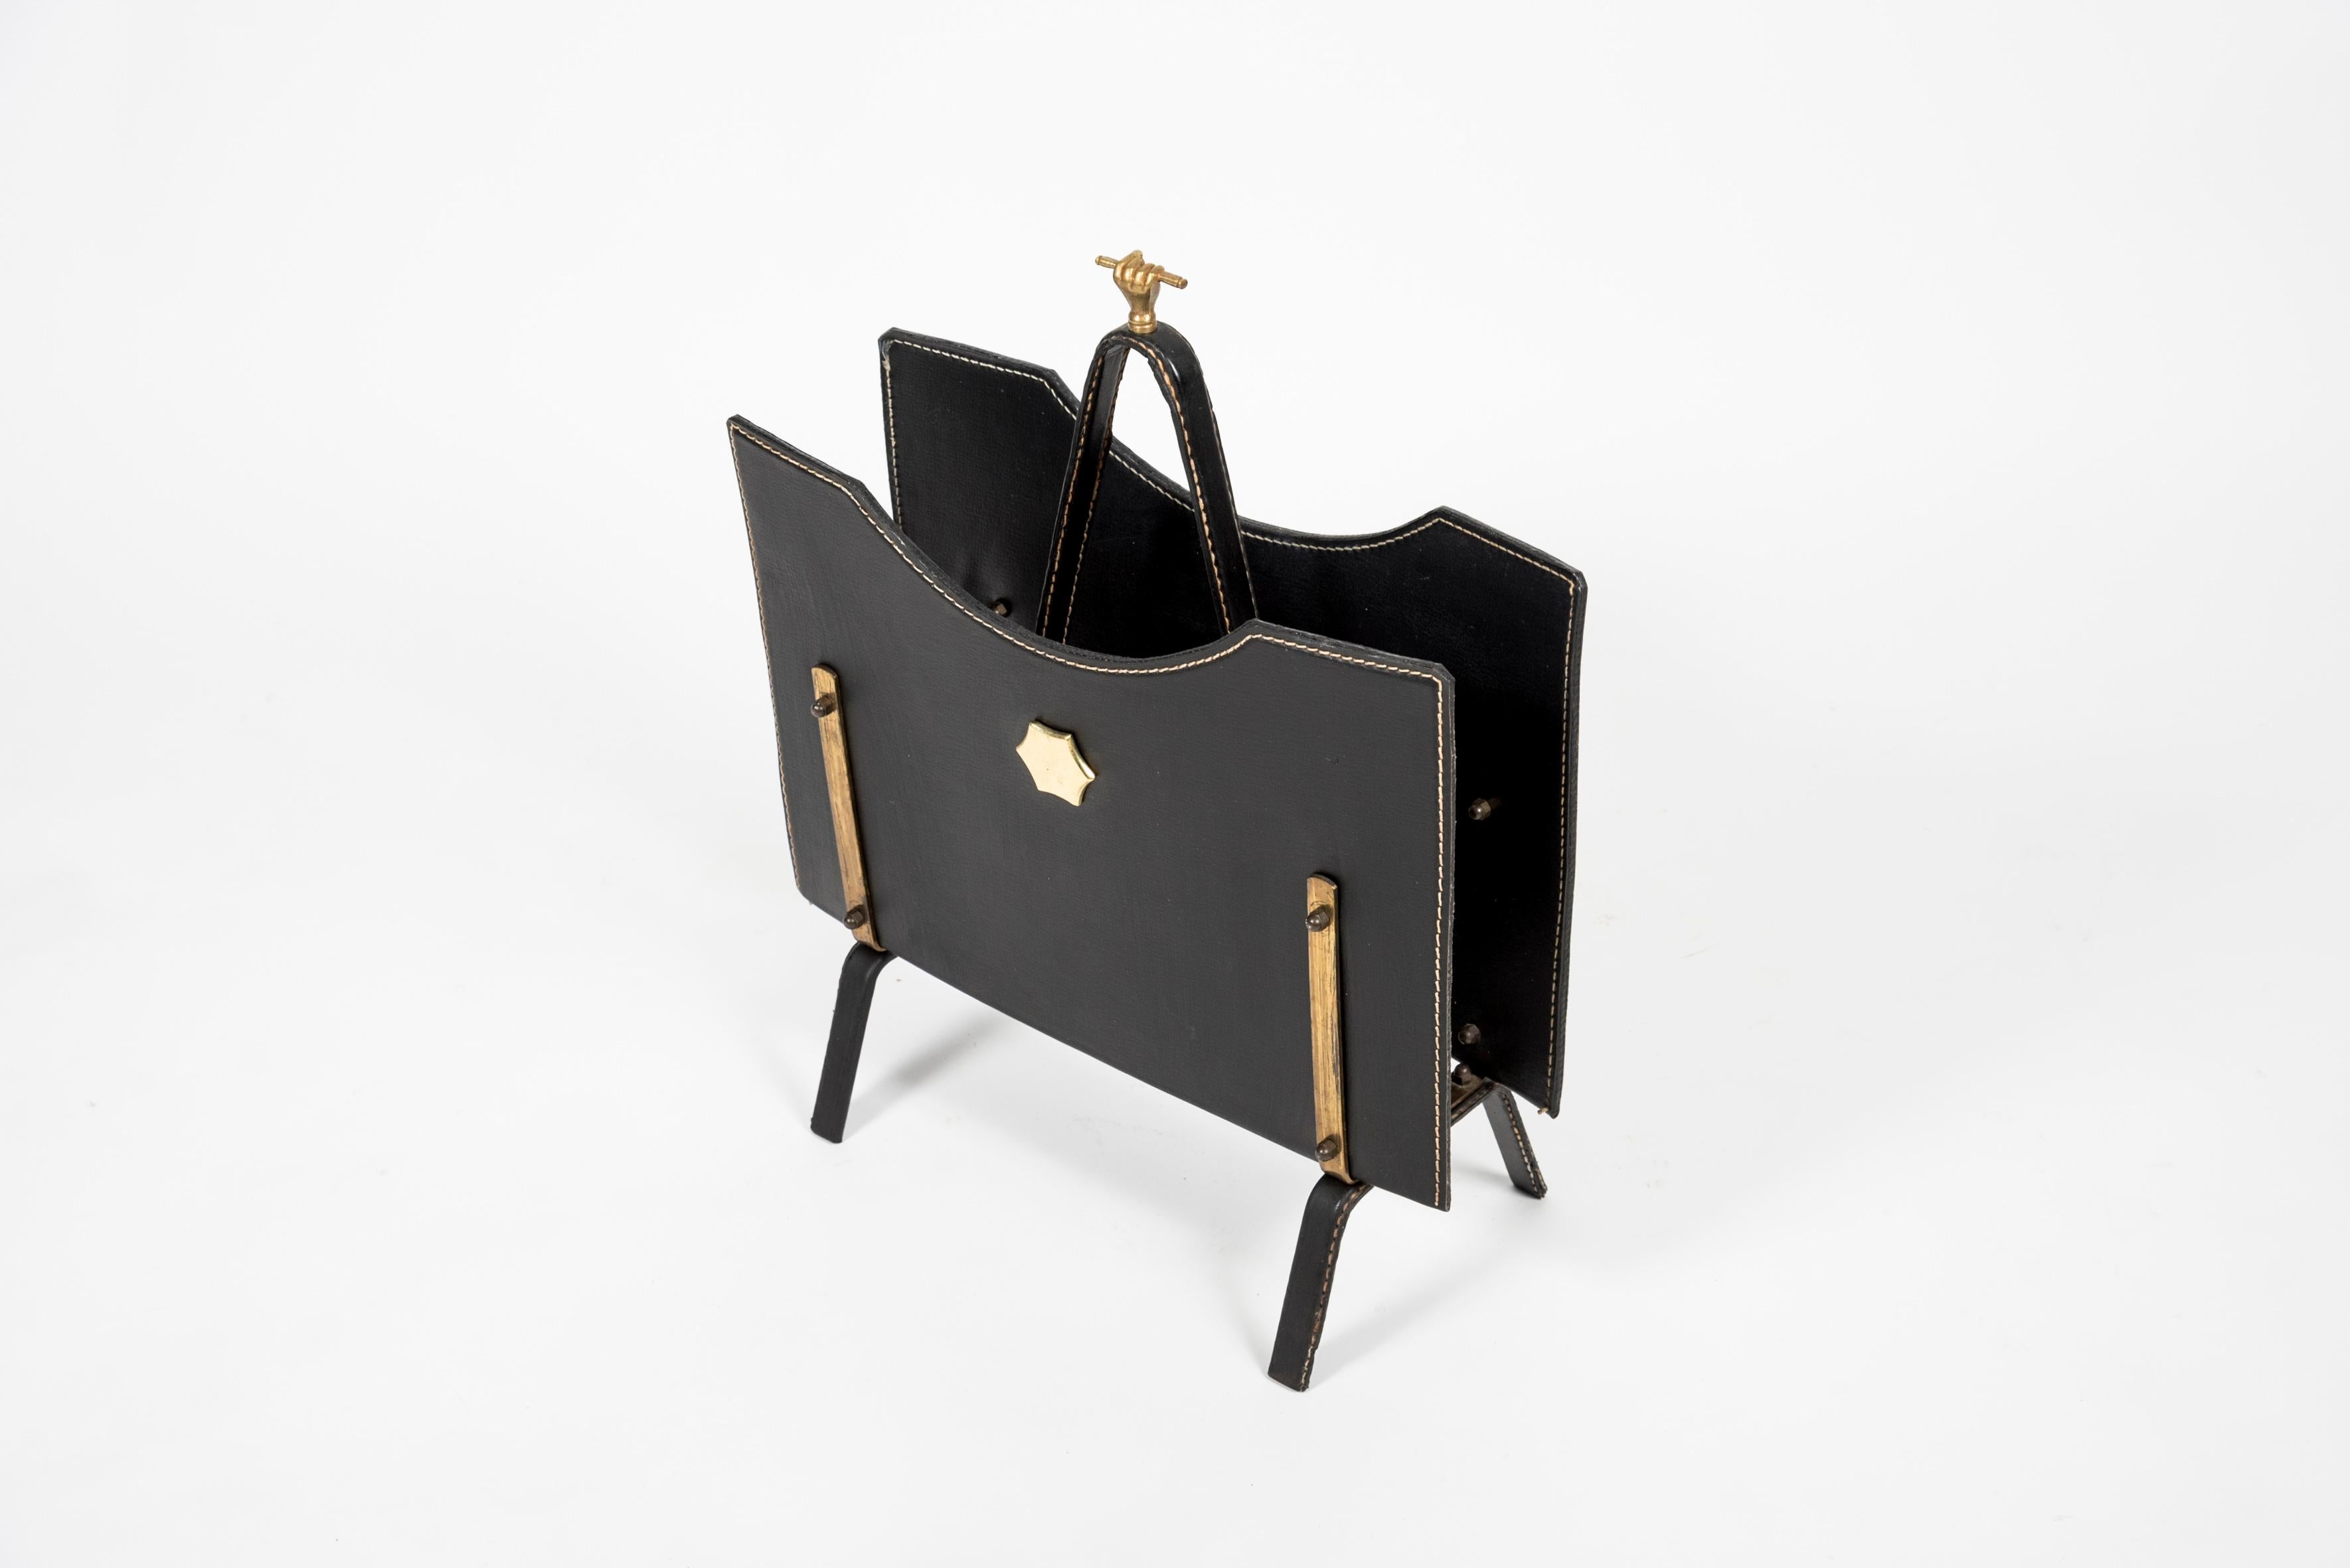 1950s stitched leather magazine rack by Jacques Adnet.
France
Great condition.